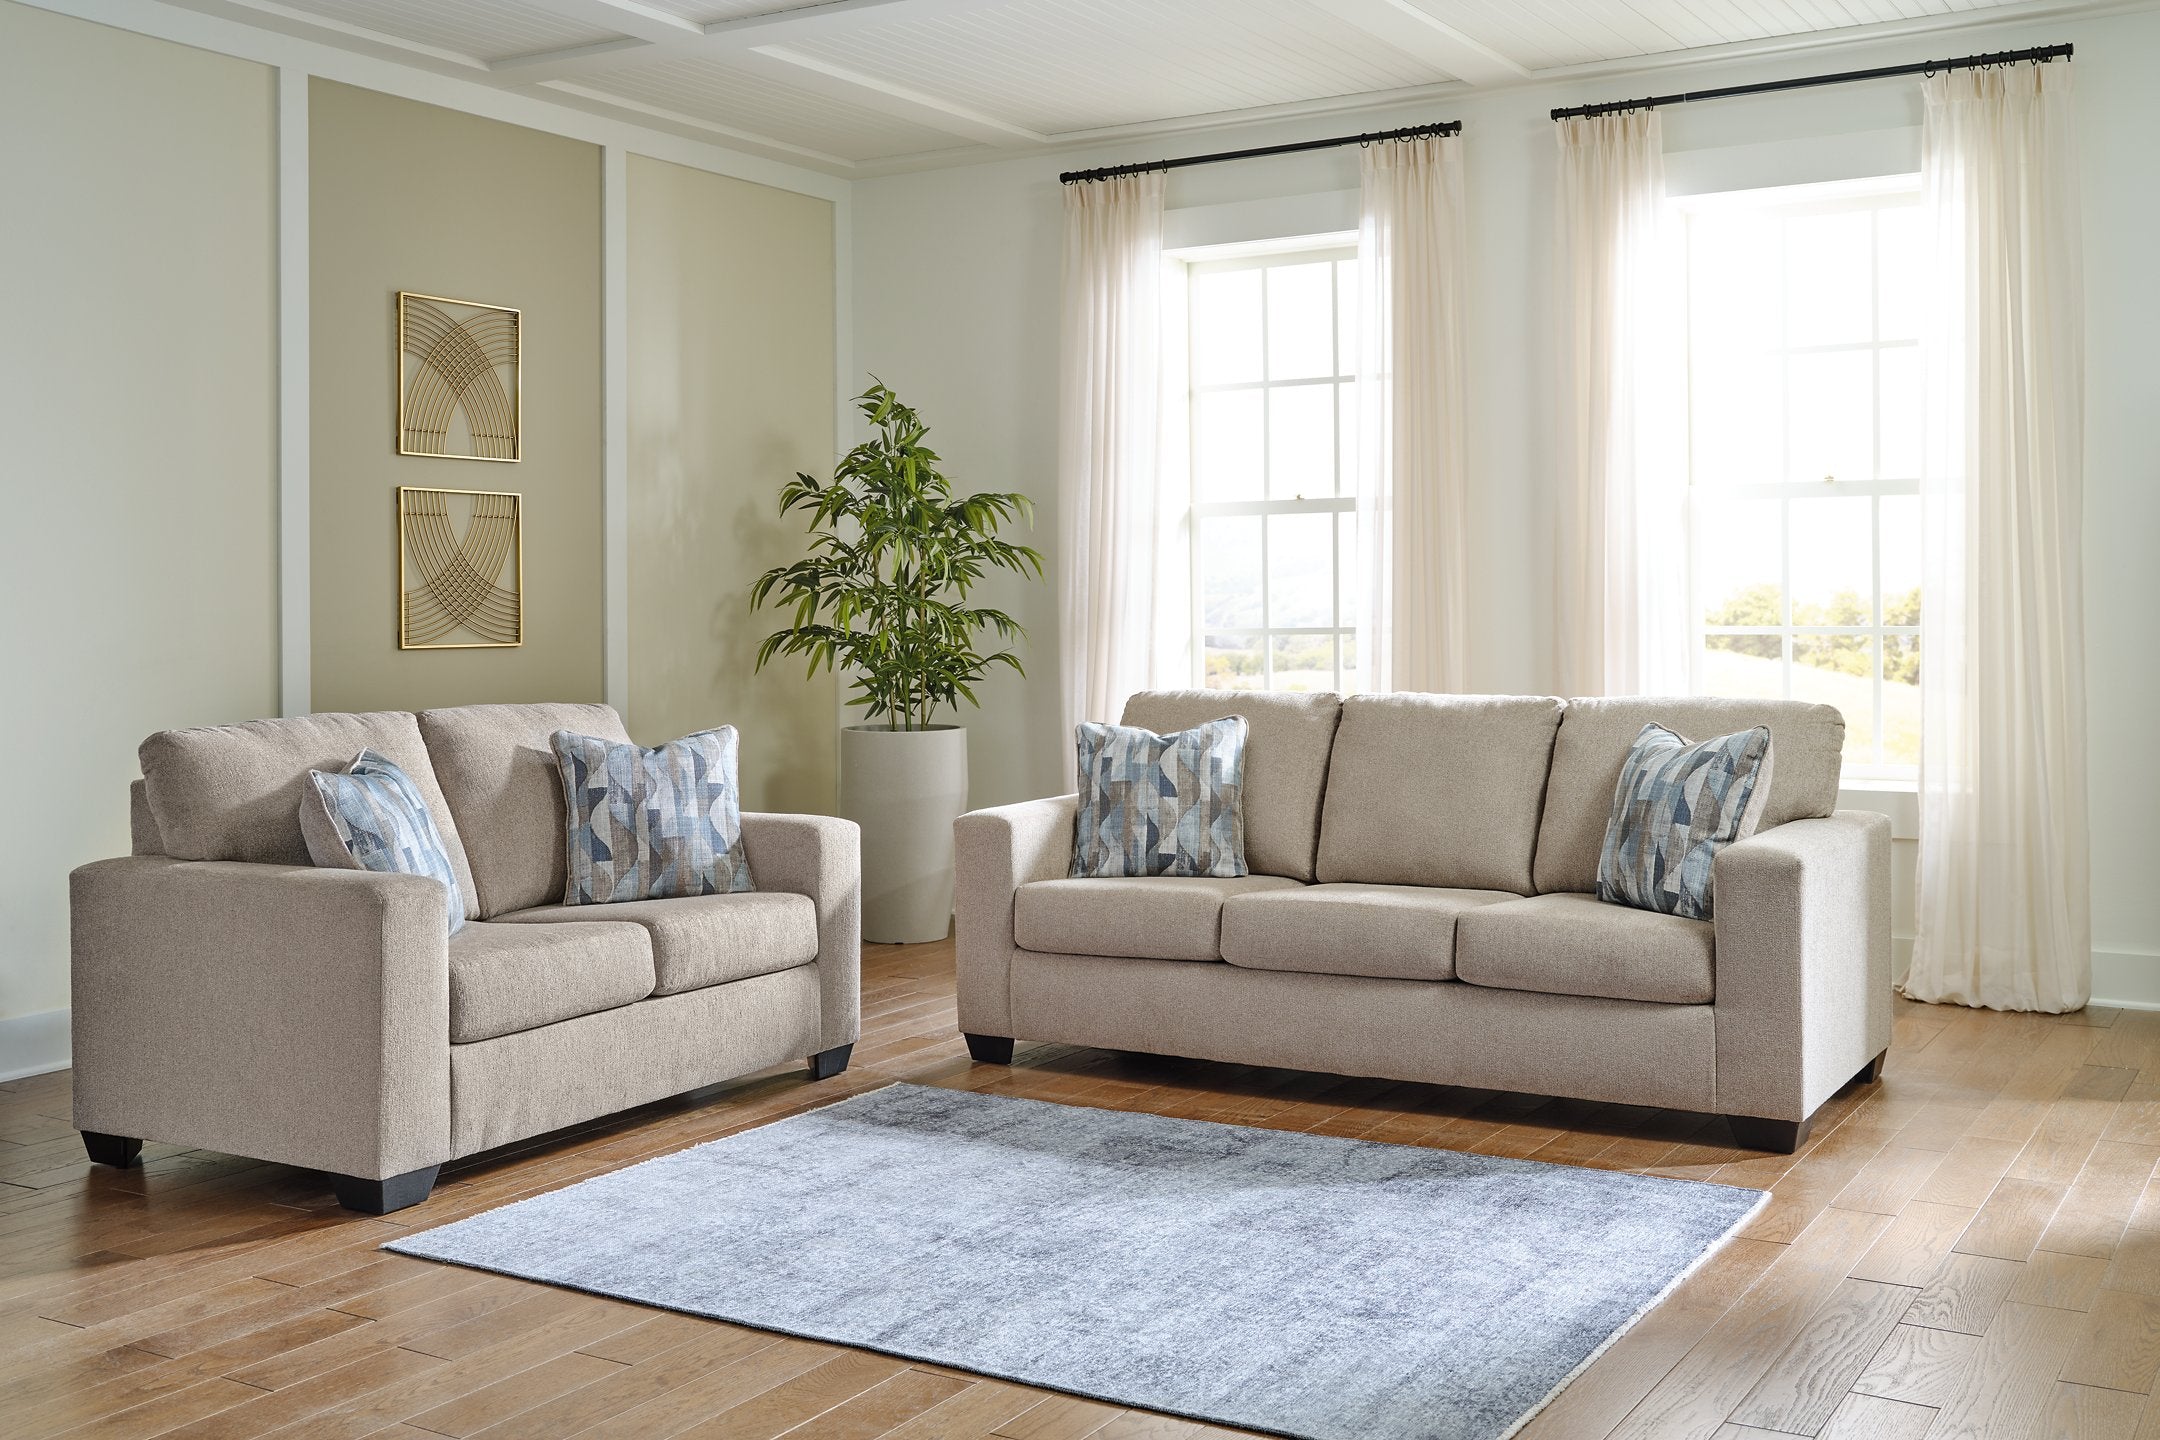 Deltona 2-Piece Upholstery Package